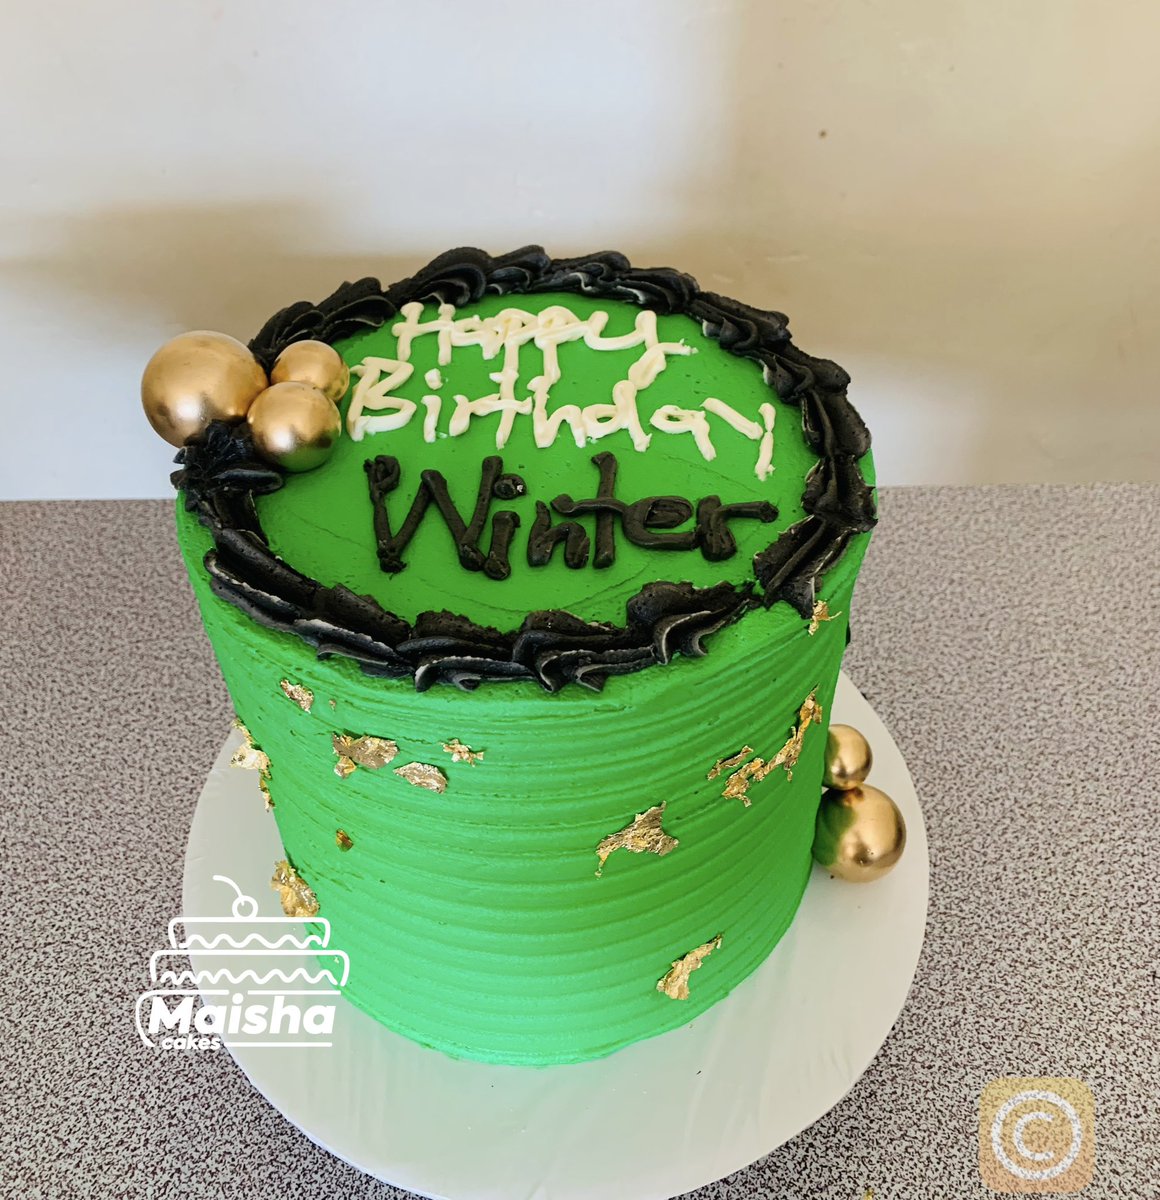 Cakes to celebrate all occasions are available on preorder at a start price of 80k. Call/Wattsapp 0783638494 to order!